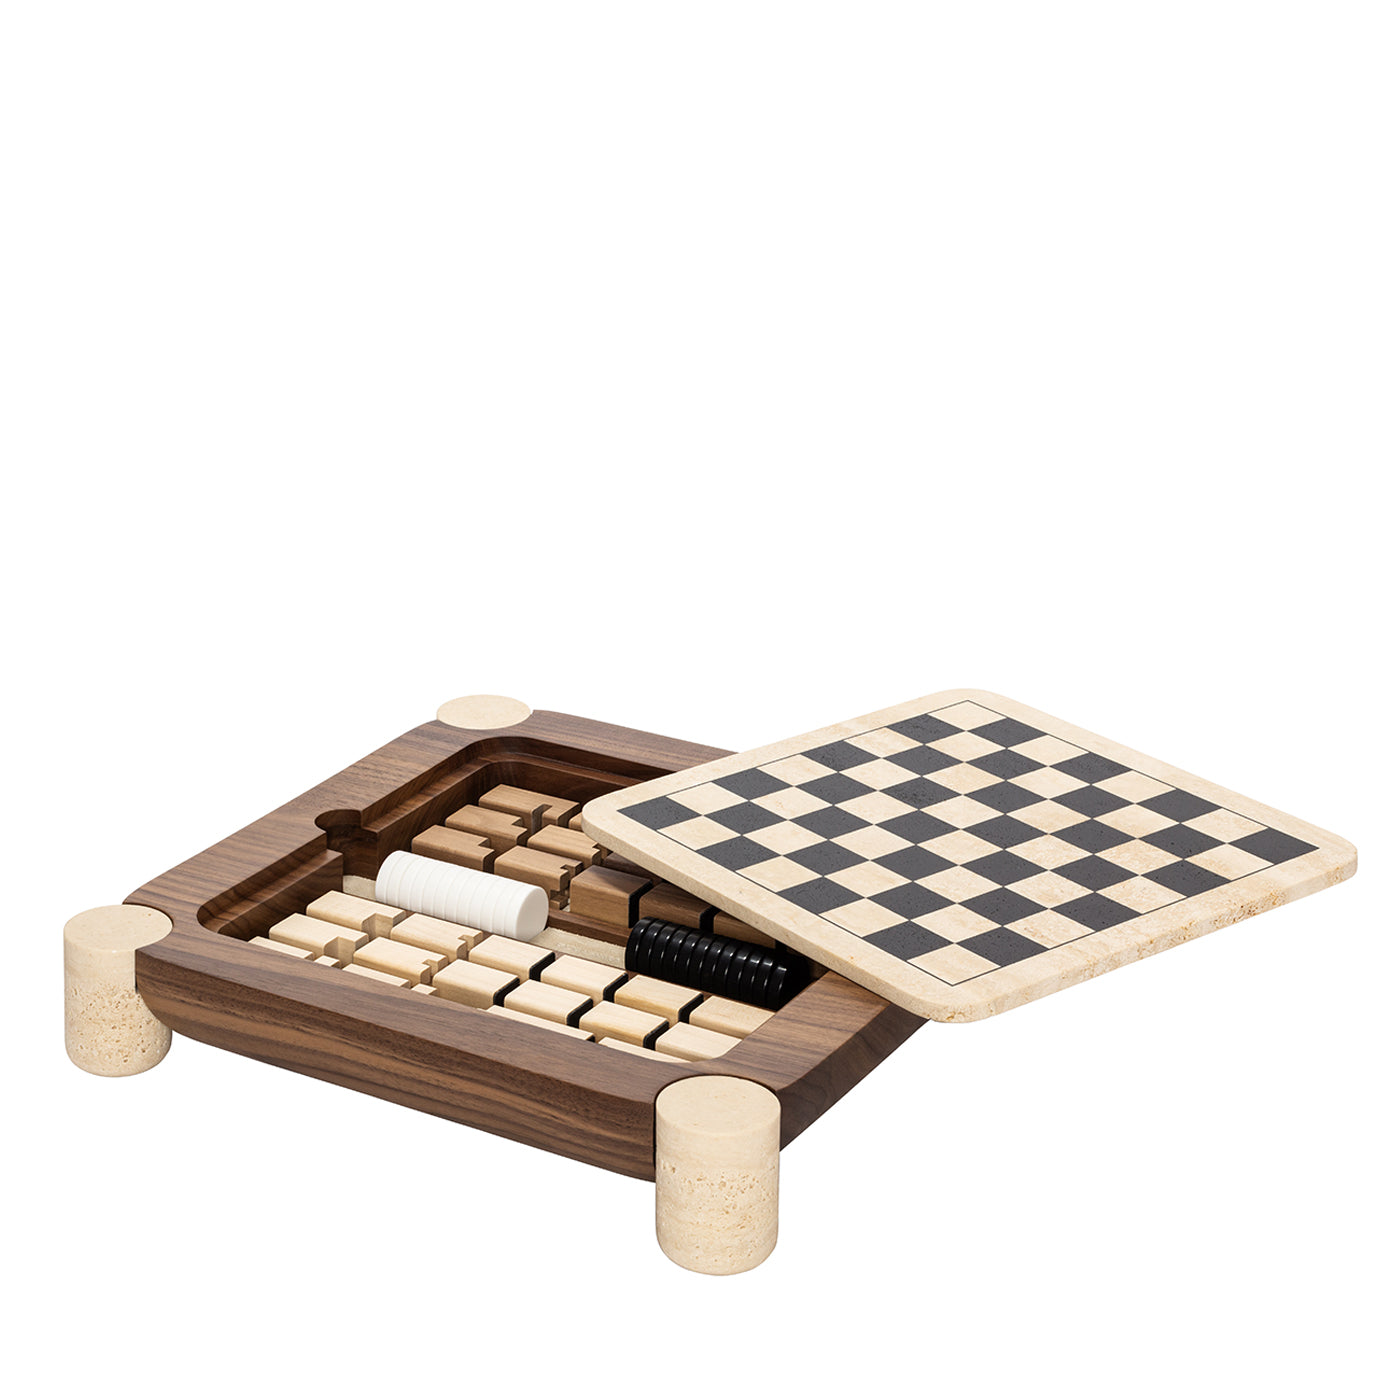 Mocambo Chess Draughts Game Set Design by Simone Fanciullacci - Vue alternative 3